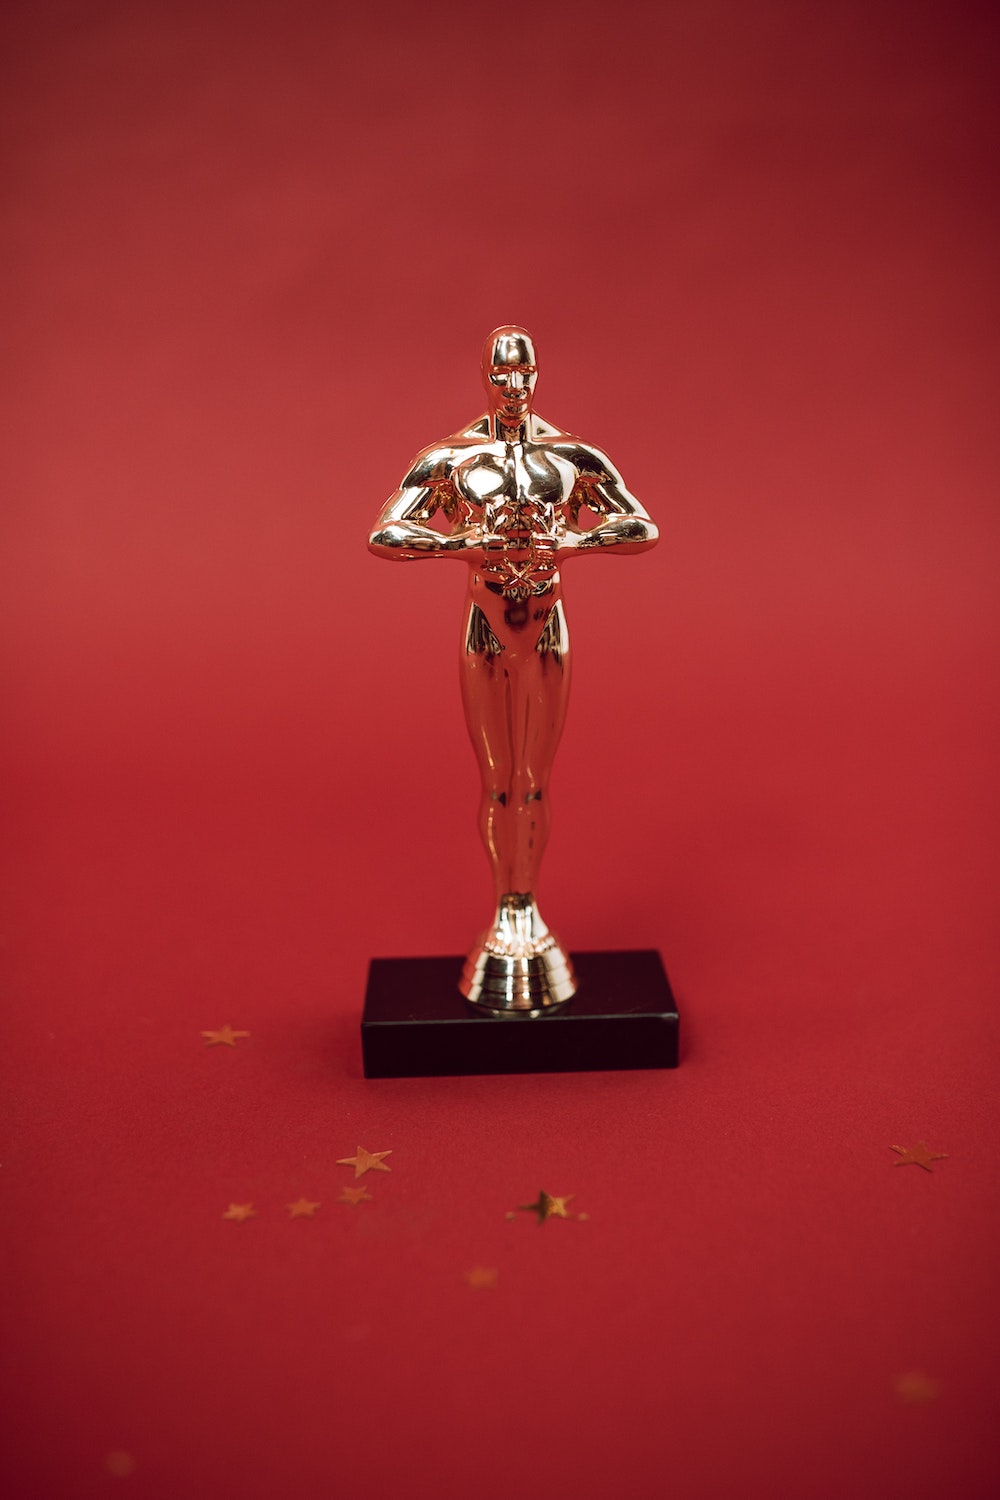 A statuette from the academy awards (the Oscars) is placed against a red background. A few gold stars litter the ground.